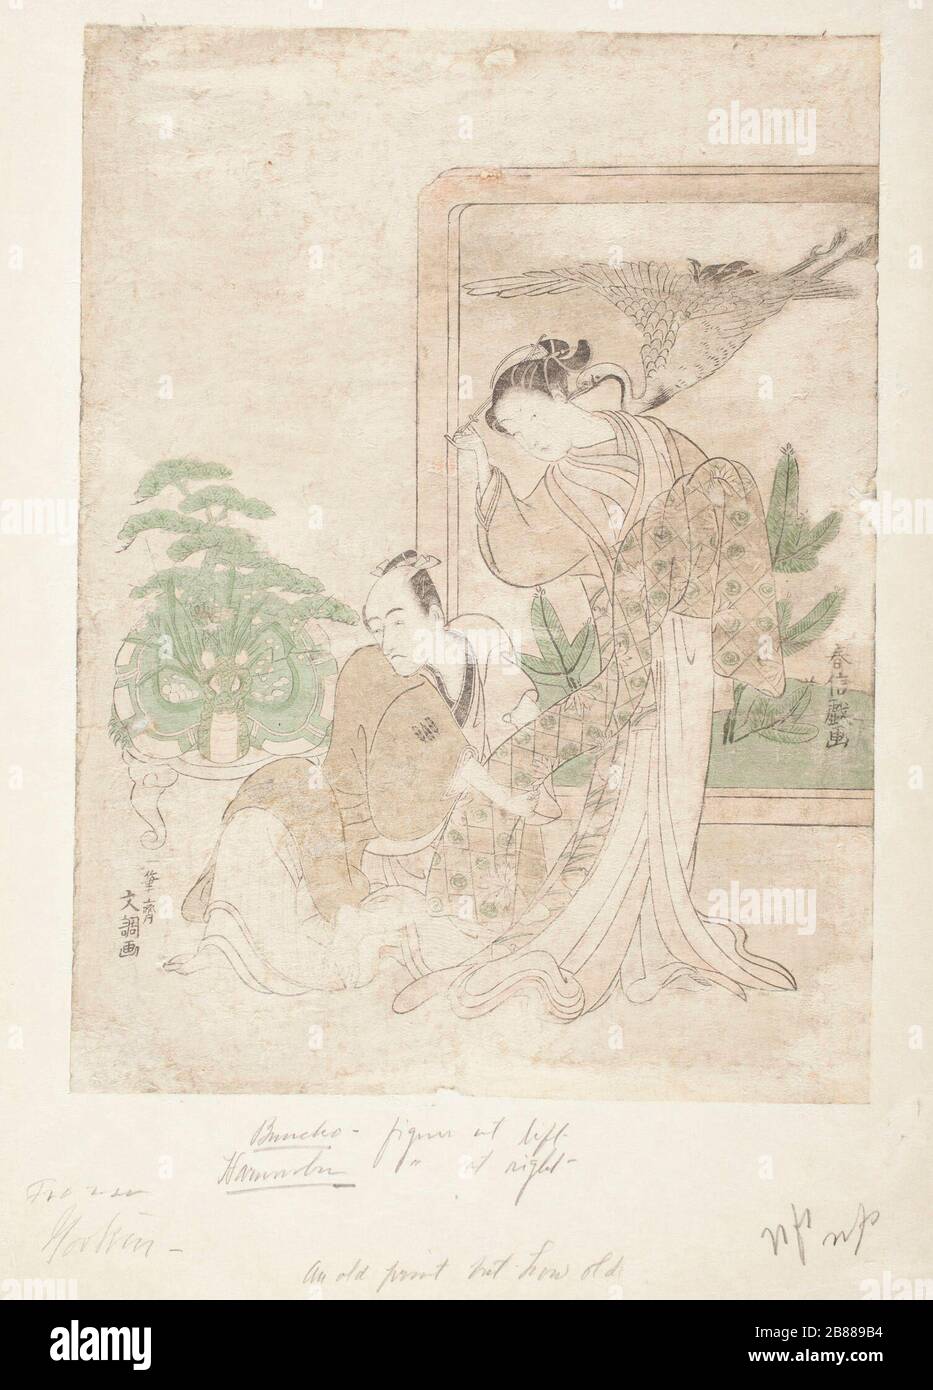 'Actor and Courtesan Parodying the Armor-Pulling Scene from the Story of the Soga Brothers; English:  1770 Prints; woodcuts Color woodblock print Sight:  11 1/16 x 8 1/2 in. (28.1 x 21.59 cm) The Joan Elizabeth Tanney Bequest (M.2006.136.300) Japanese Art; 1770date QS:P571,+1770-00-00T00:00:00Z/9; ' Stock Photo